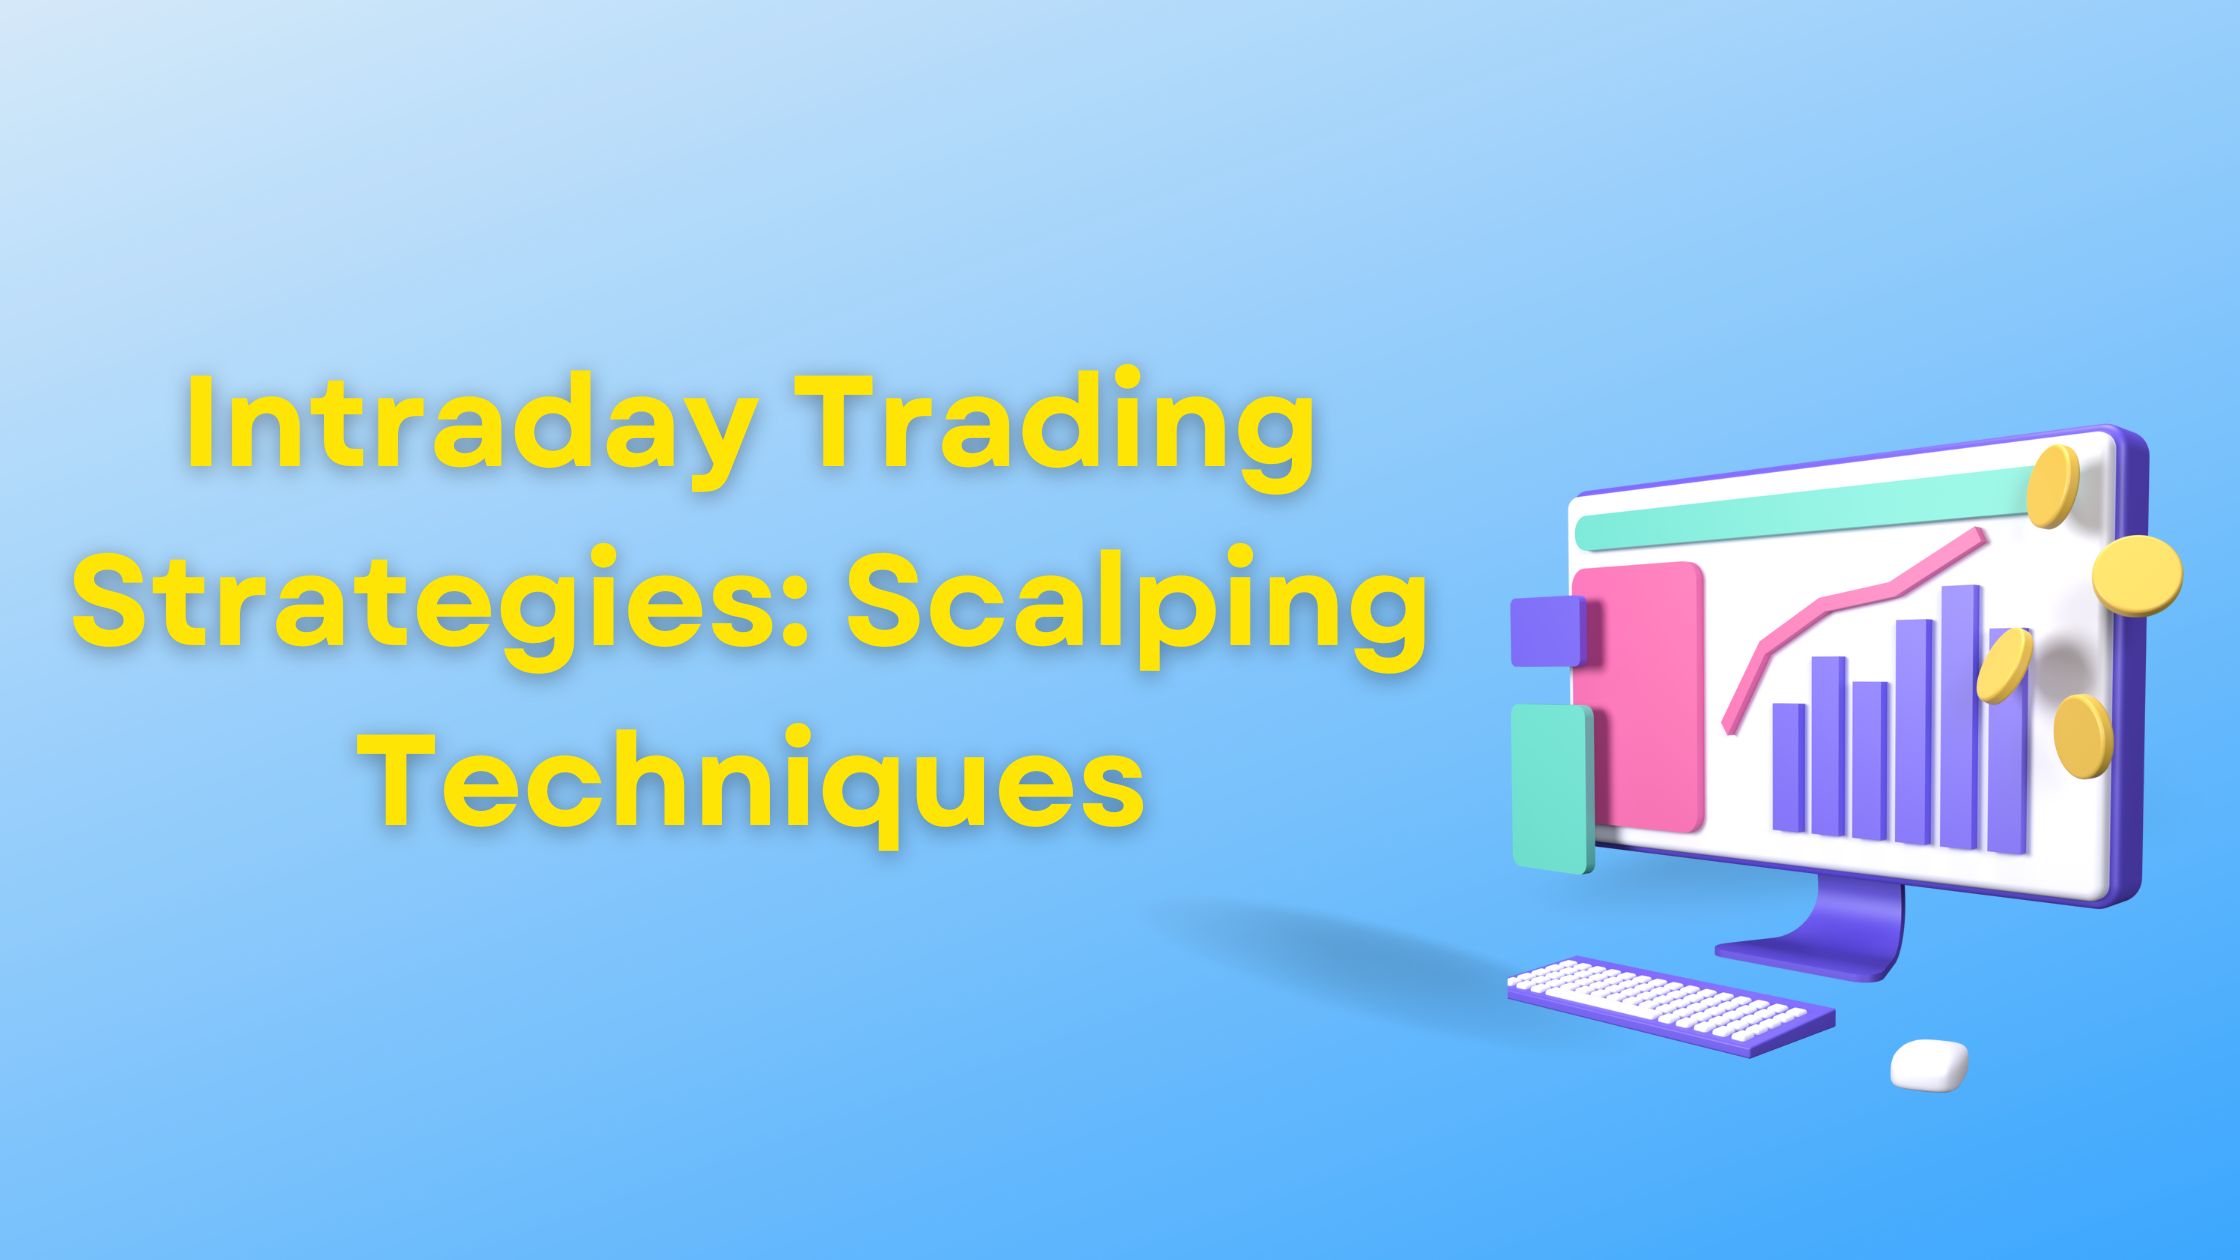 Intraday Trading Strategies: Scalping Techniques